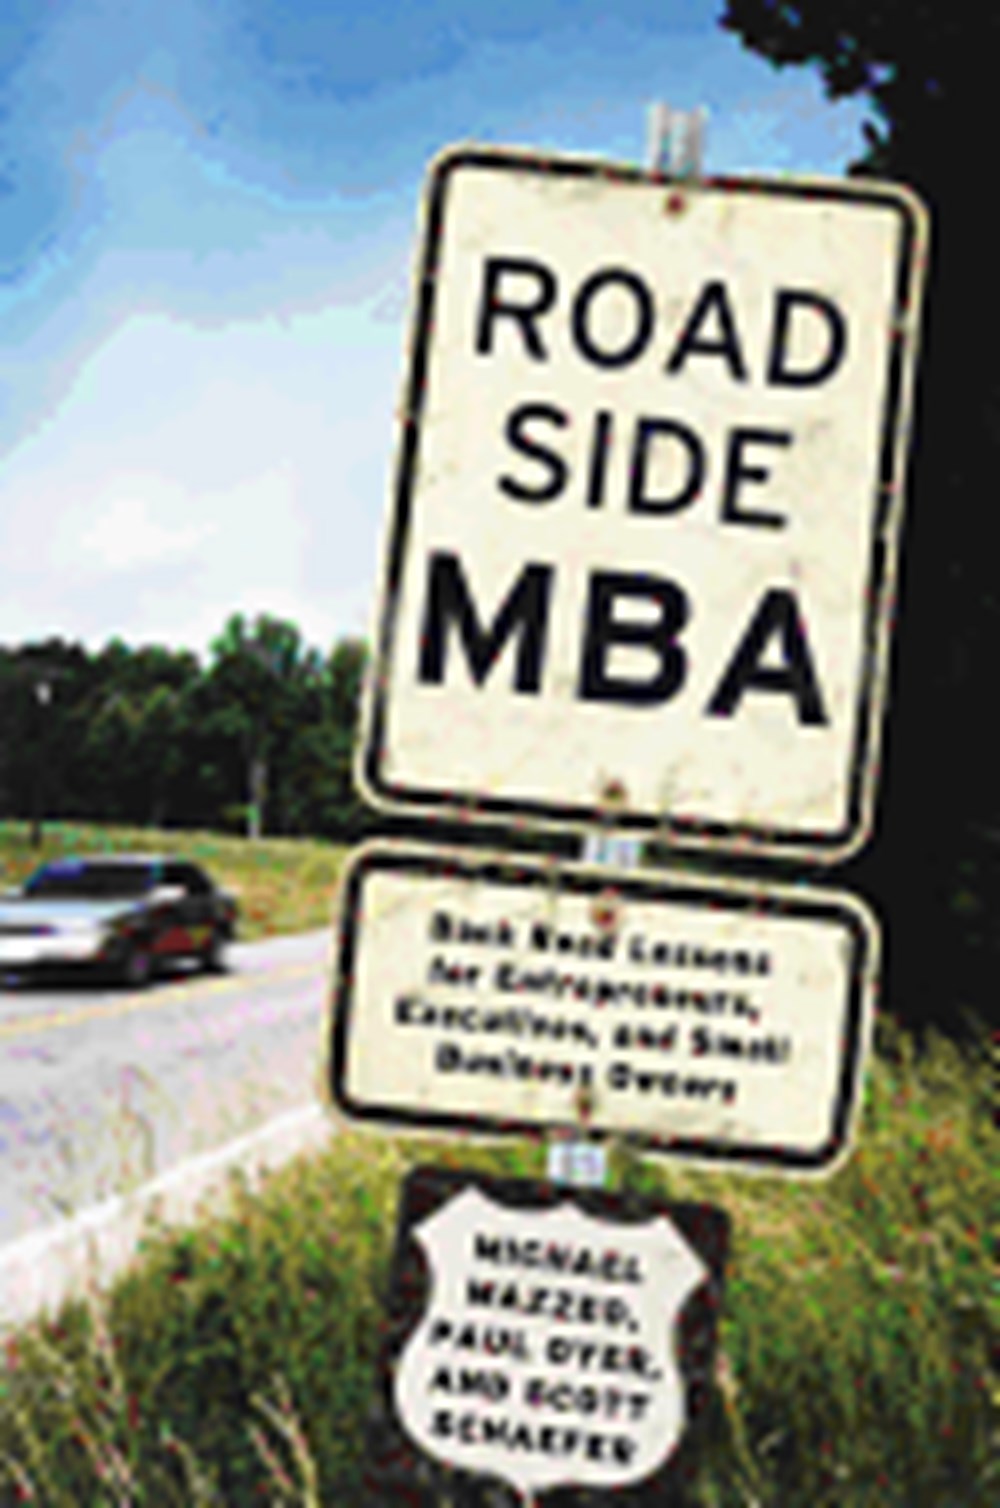 Roadside MBA Back Road Lessons for Entrepreneurs, Executives and Small Business Owners